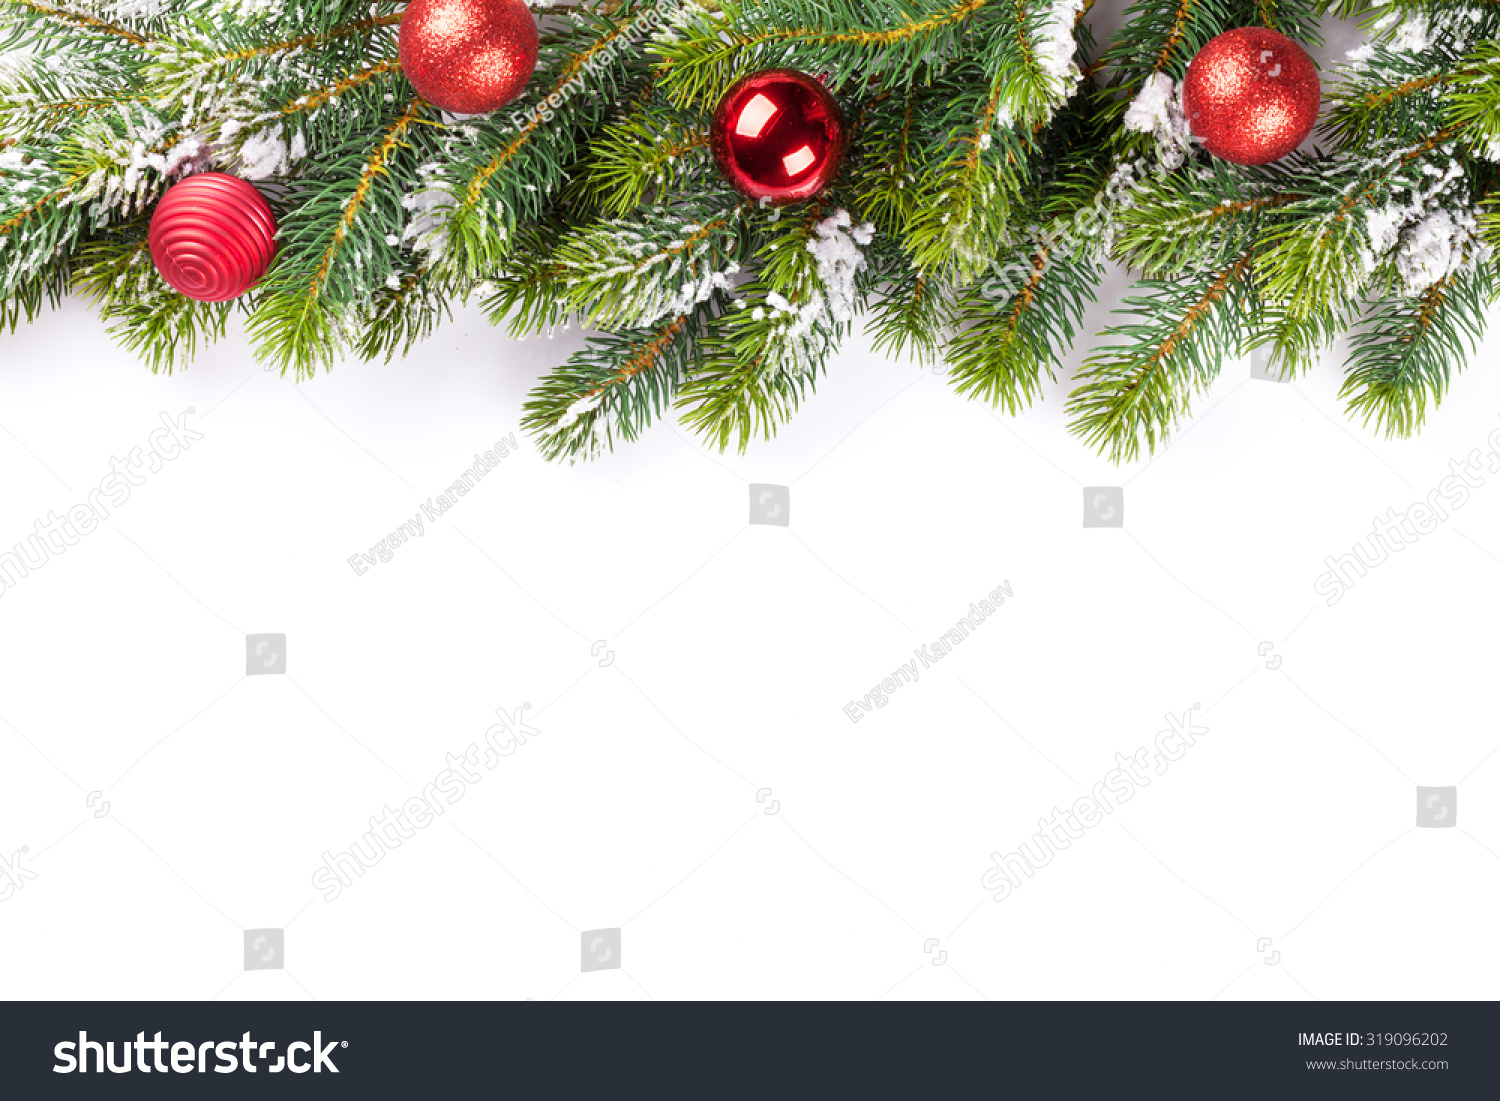 Christmas tree branch with baubles decor. Isolated on white background #319096202